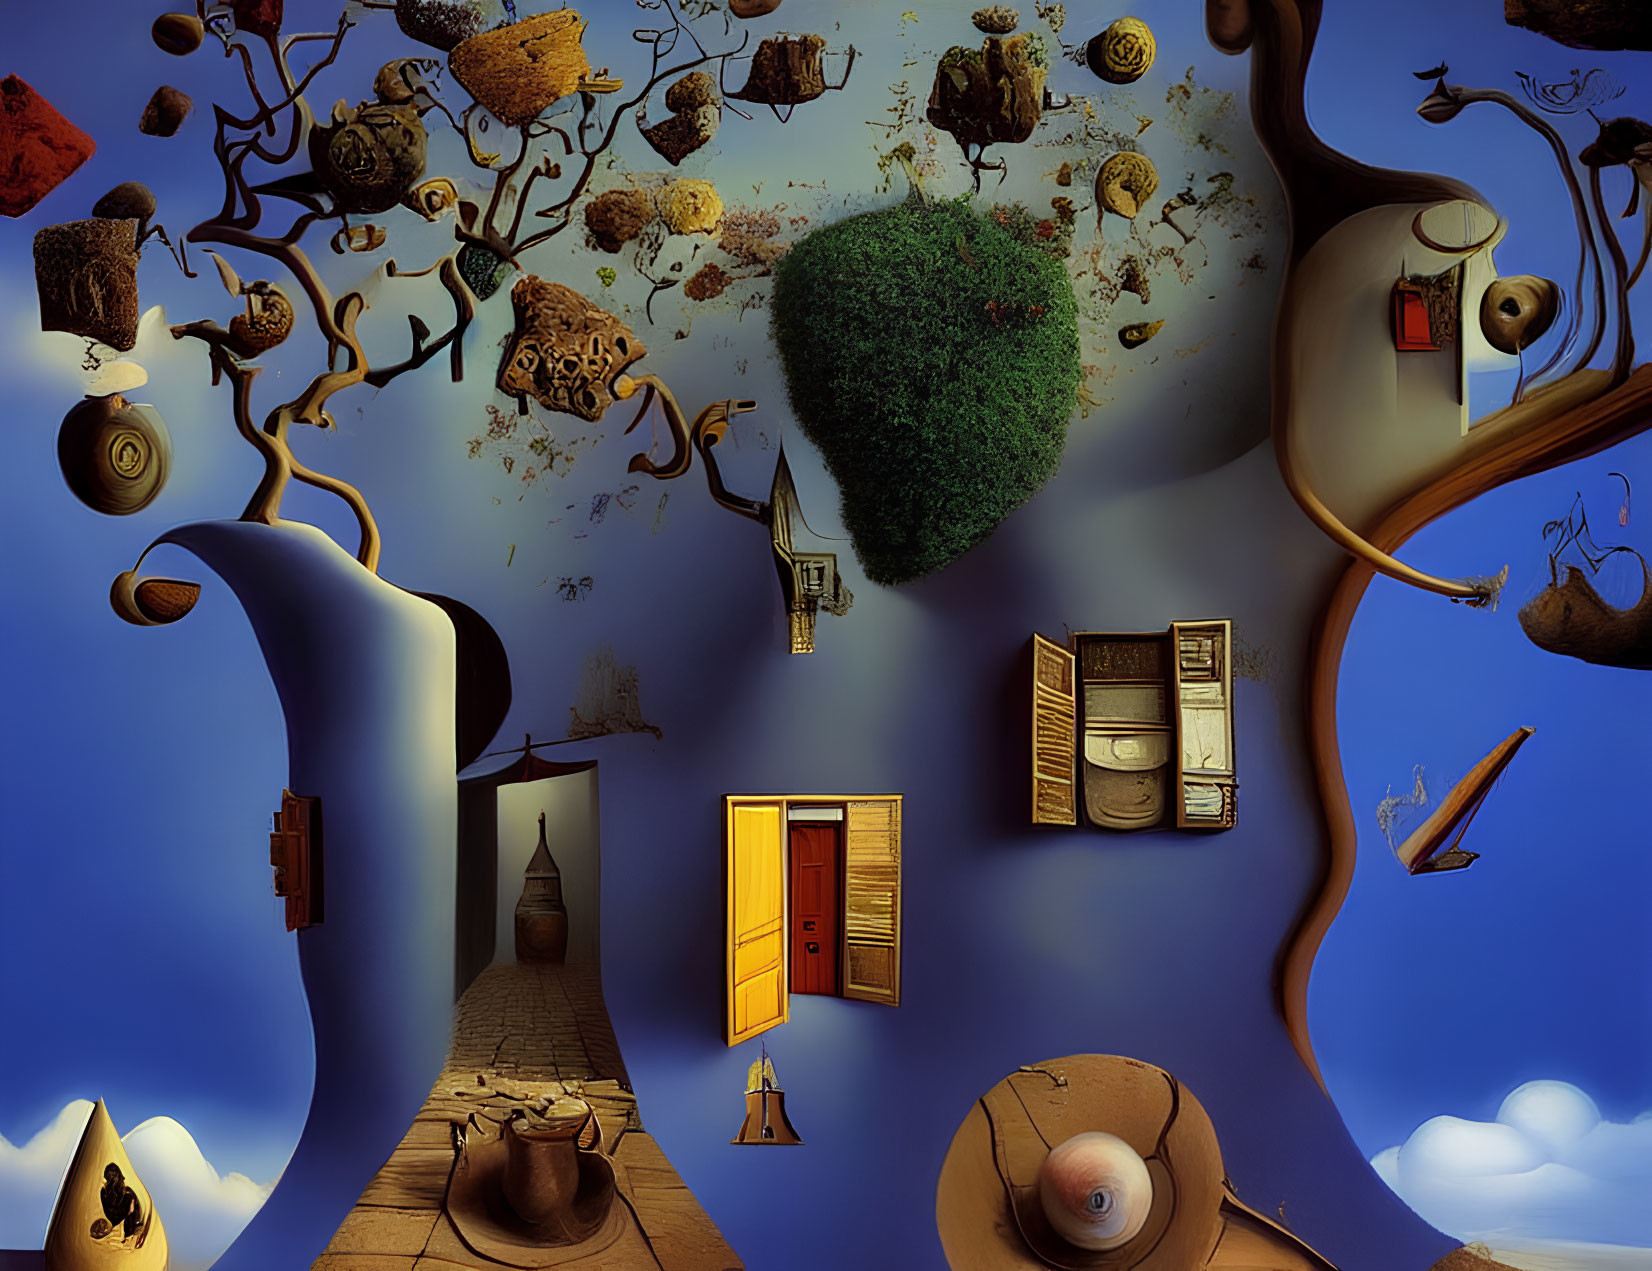 Surreal floating objects: tree, doors, furniture on blue sky.